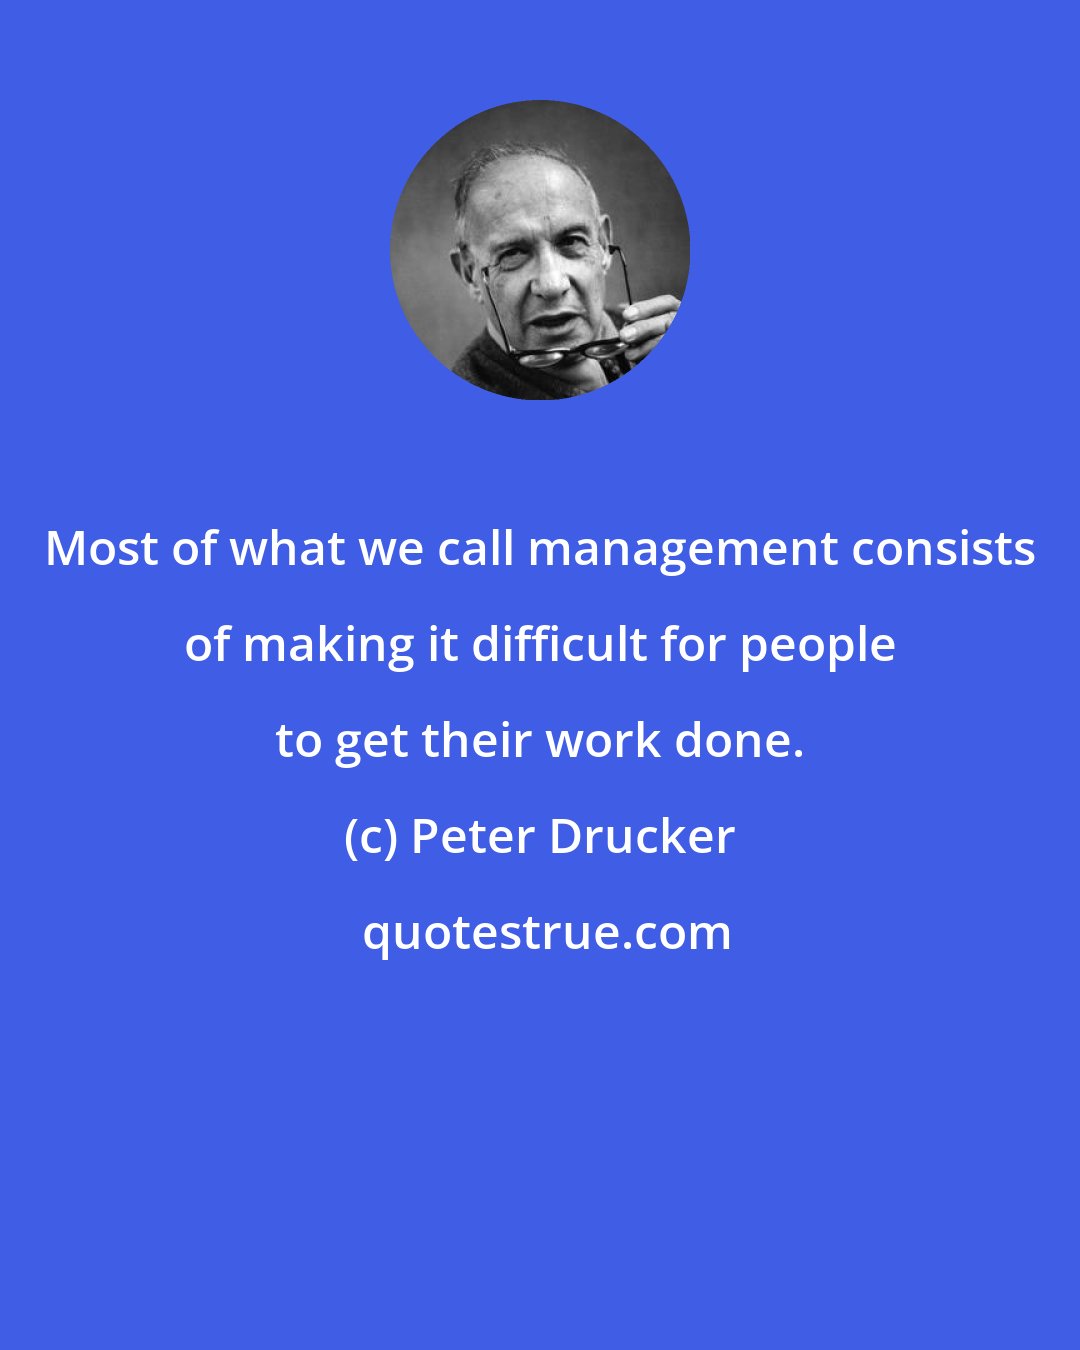 Peter Drucker: Most of what we call management consists of making it difficult for people to get their work done.